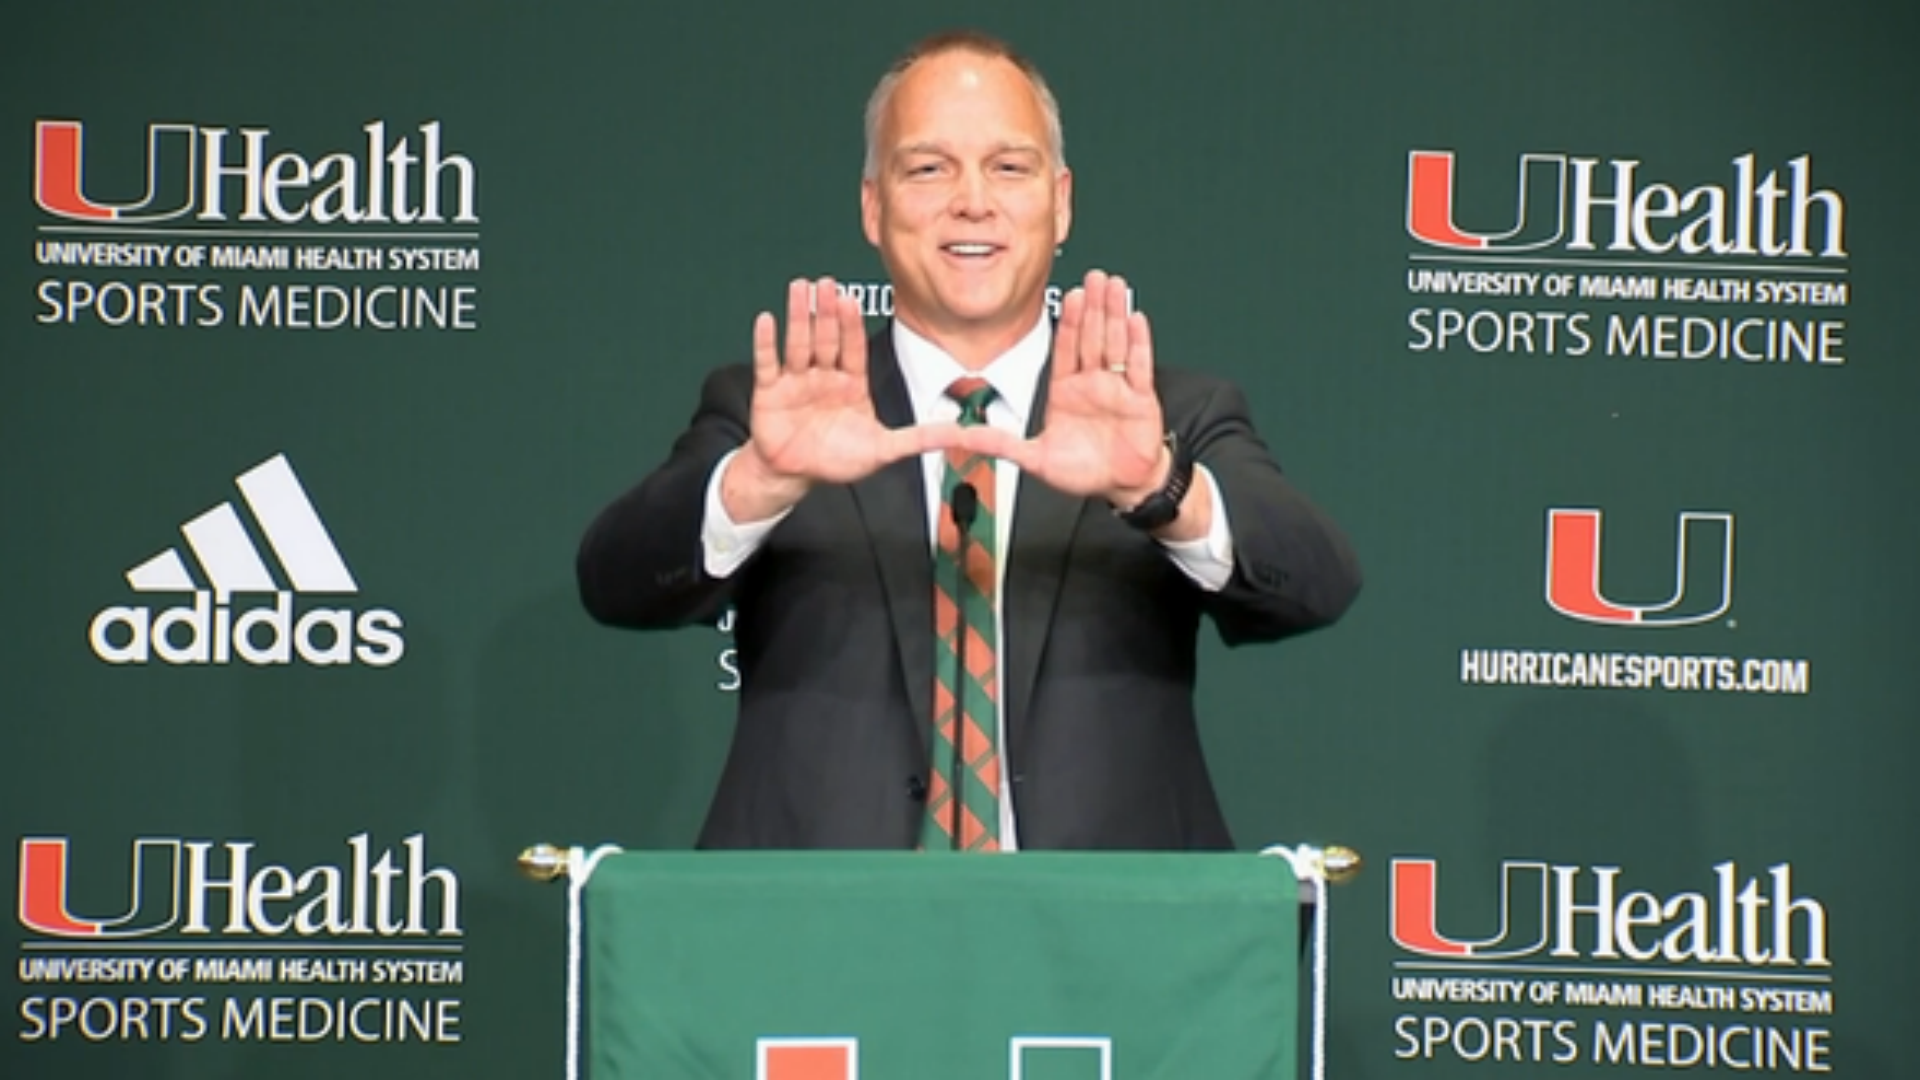 After being contacted multiple times over the years, Mark Richt returns home